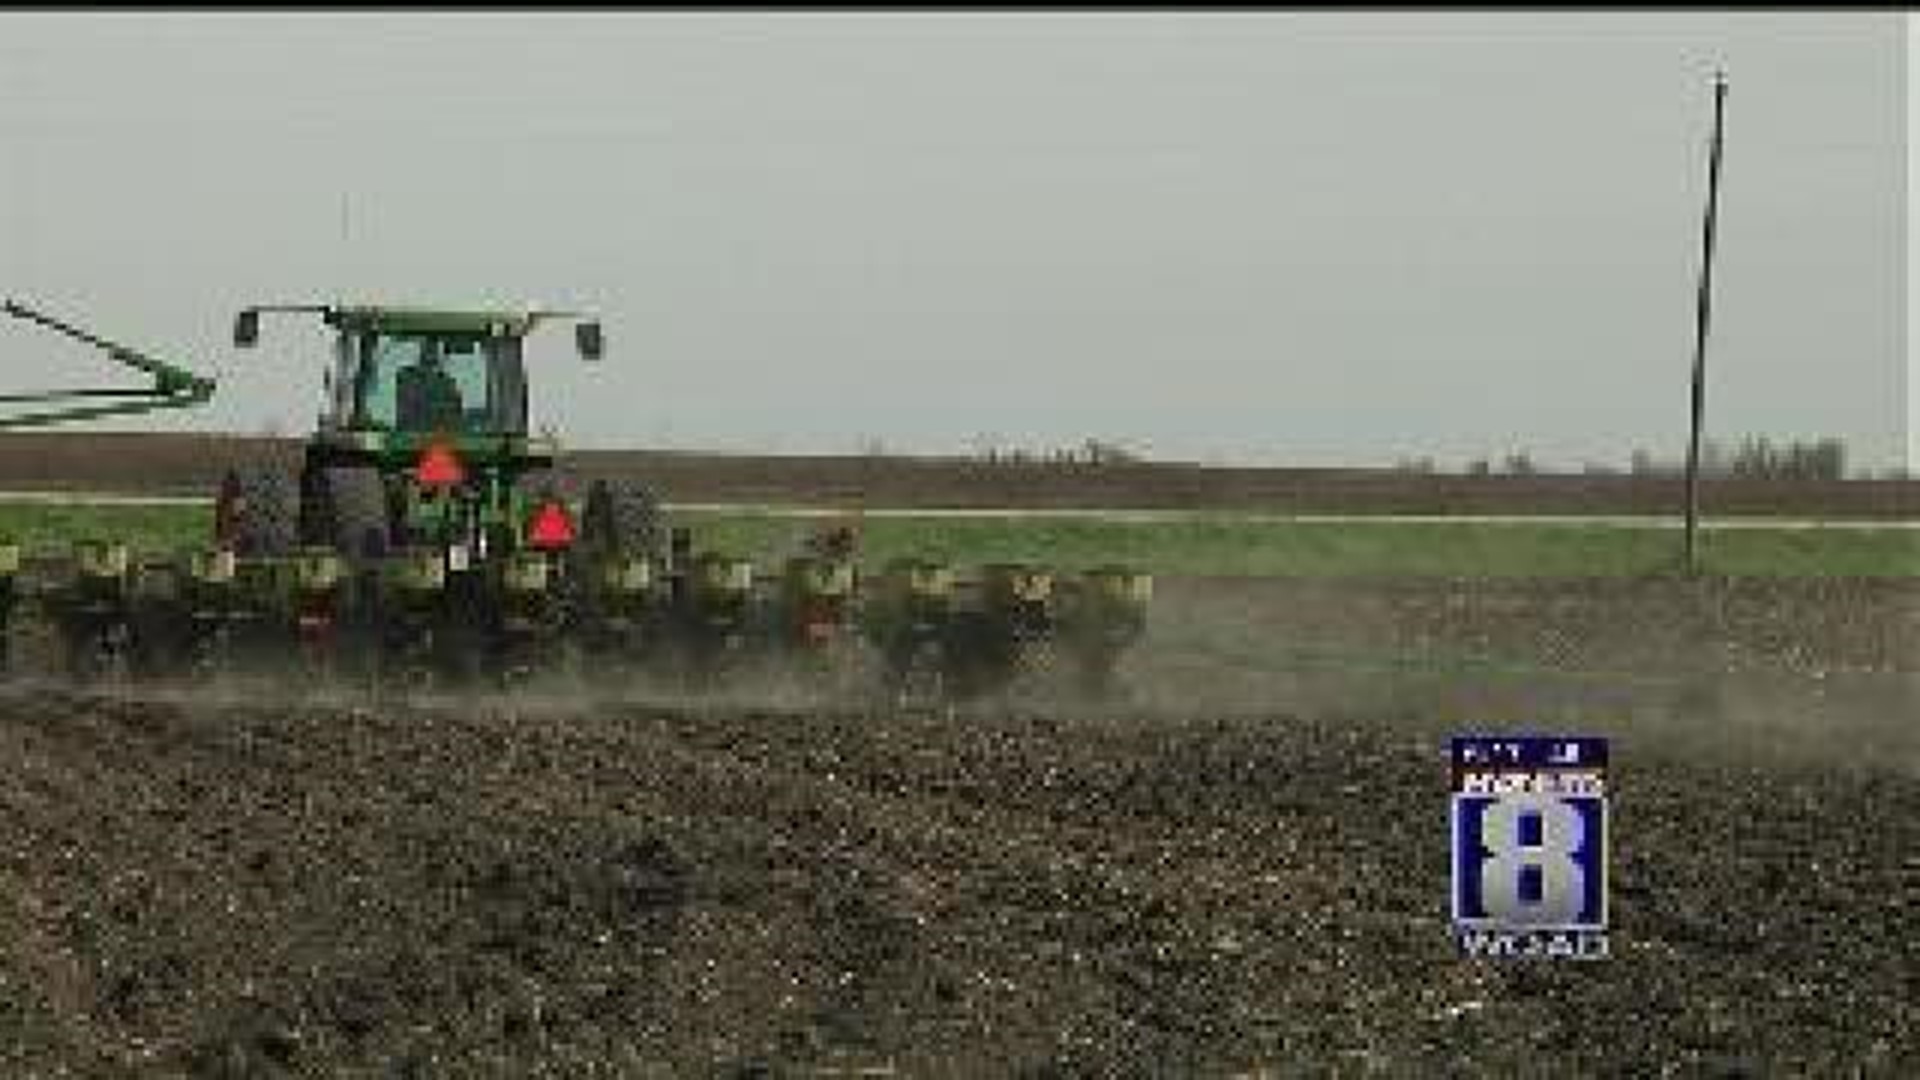 Ag in the AM: Be an Iowa Farmer for a Day